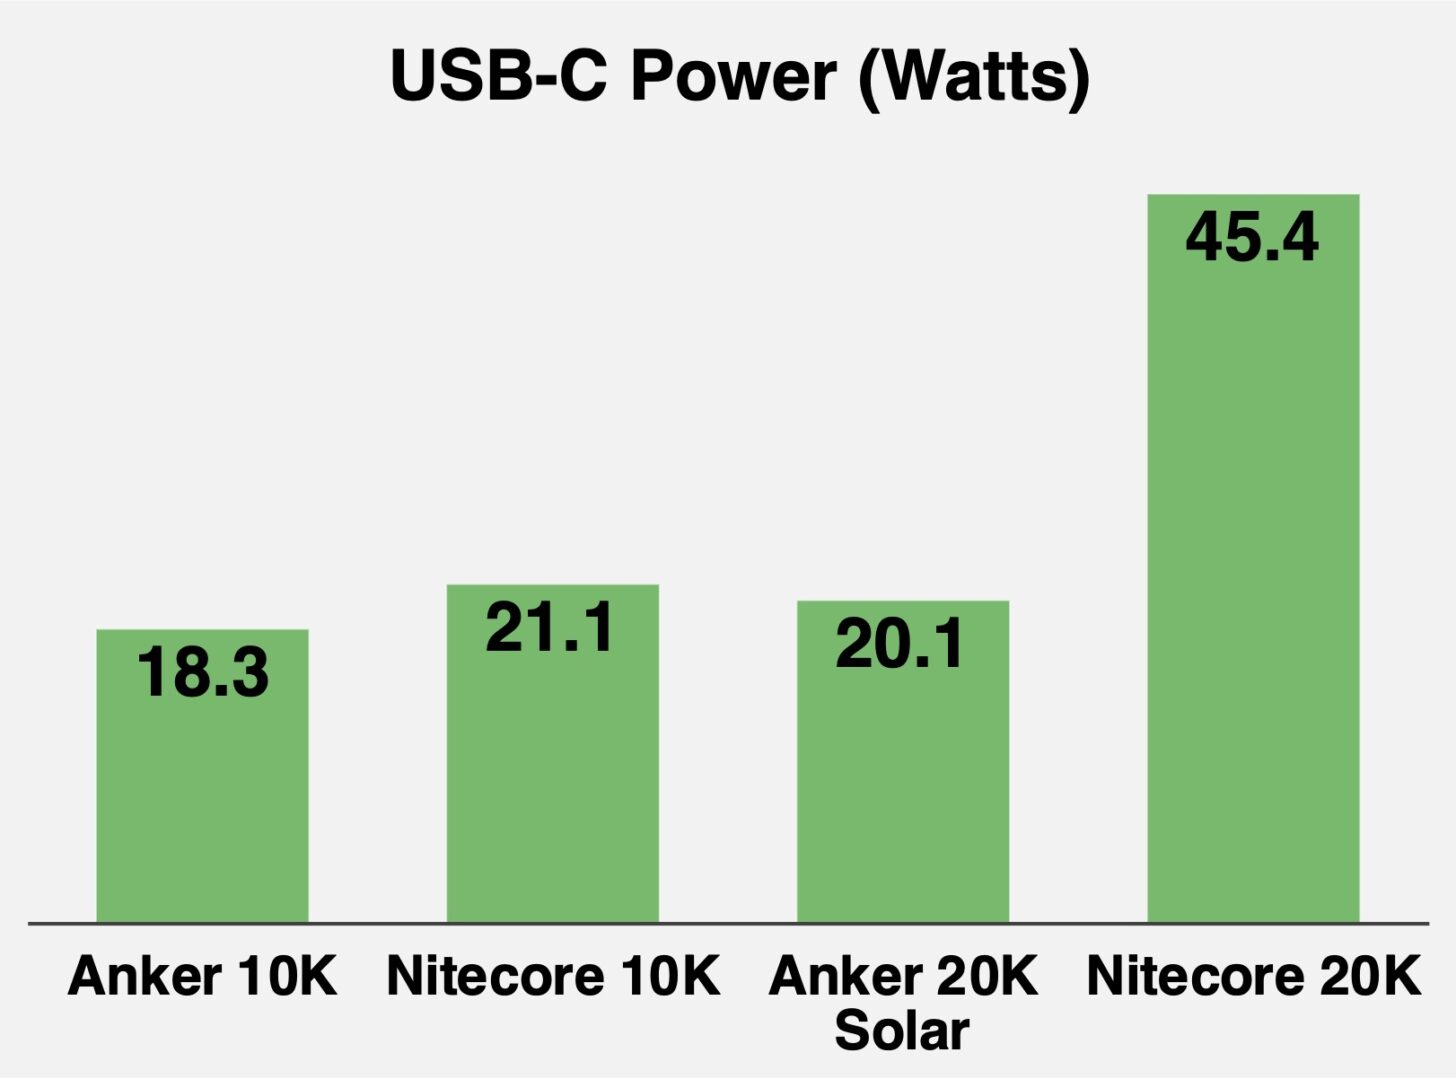 Chart comparing USB-C power delivered in watts. Higher numbers are better.